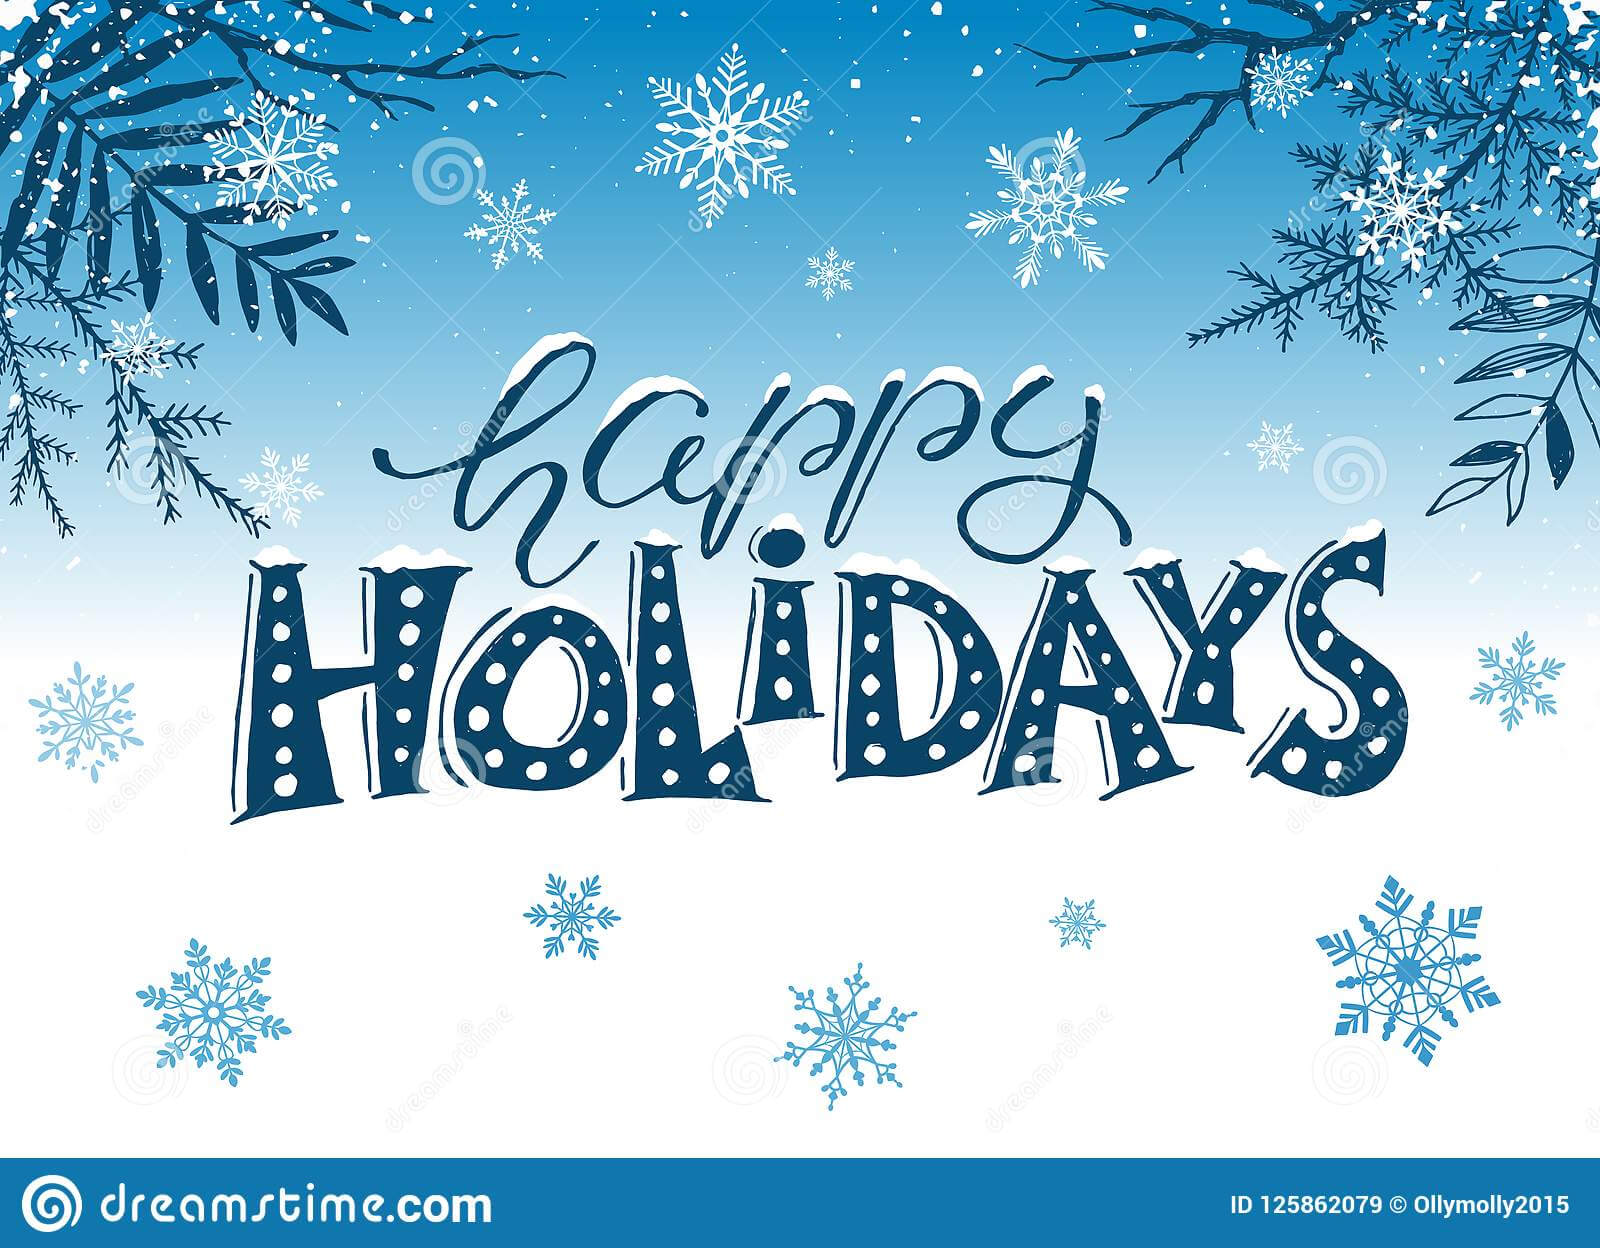 Happy Holidays Greeting Card Stock Vector – Illustration Of Pertaining To Happy Holidays Card Template